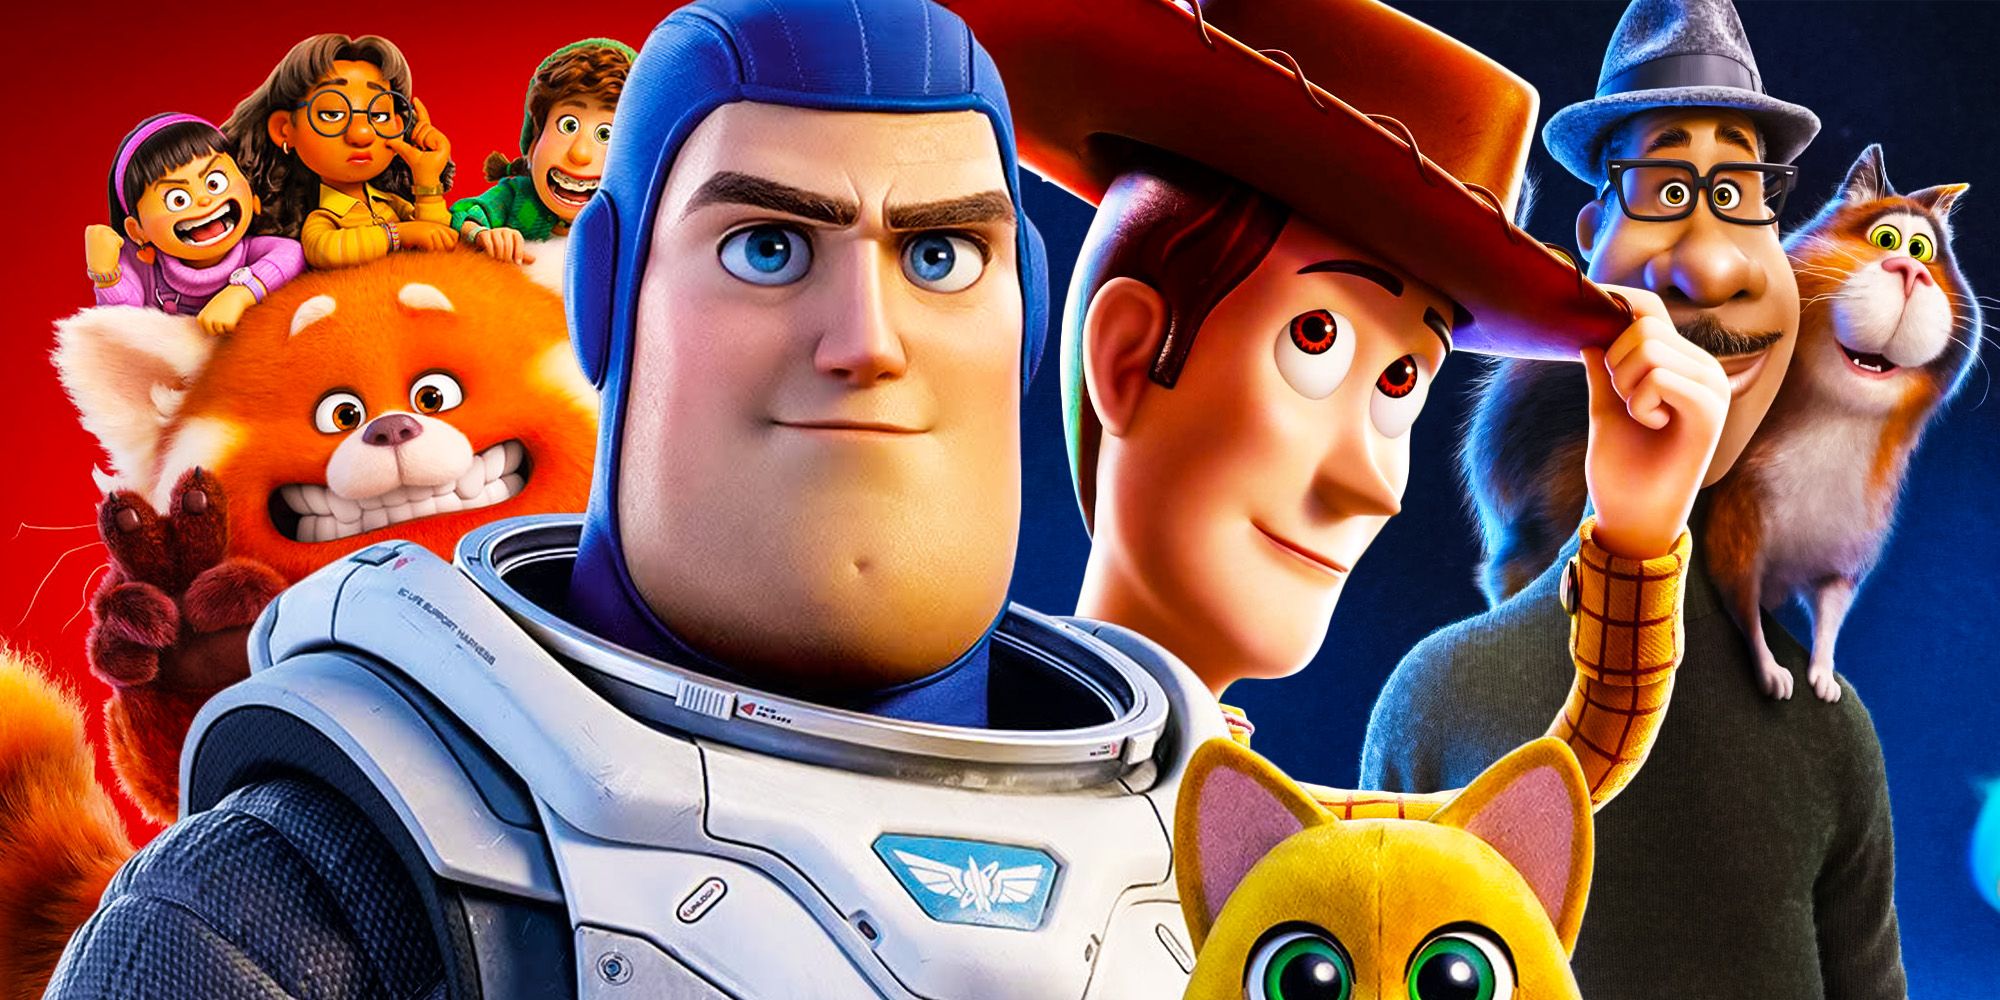 All Pixar movies ranked including Lightyear, Turning Red, Toy Story, and Soul